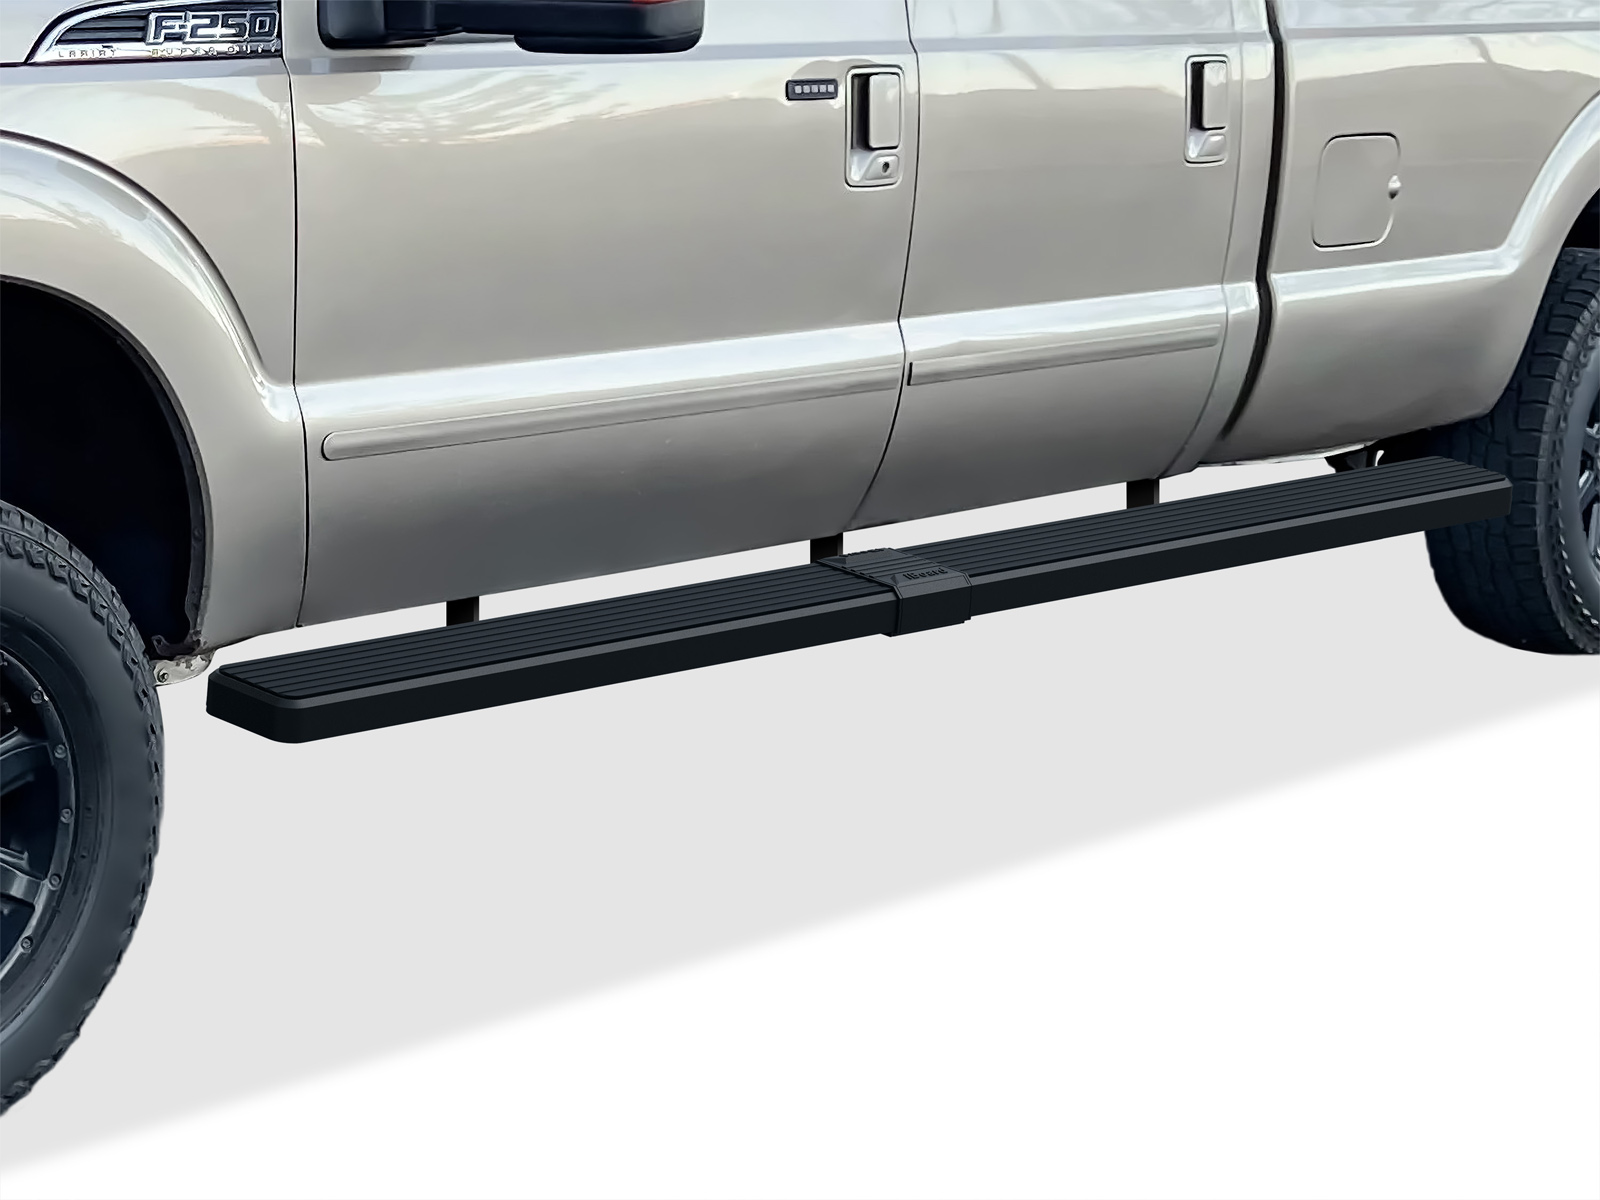 1999-2016 Ford F-250/F-350/F-450/F-550 Super Duty Crew Cab 6.5 ft Bed Both Sides iStep W2W 5 Inch Stainless Steel